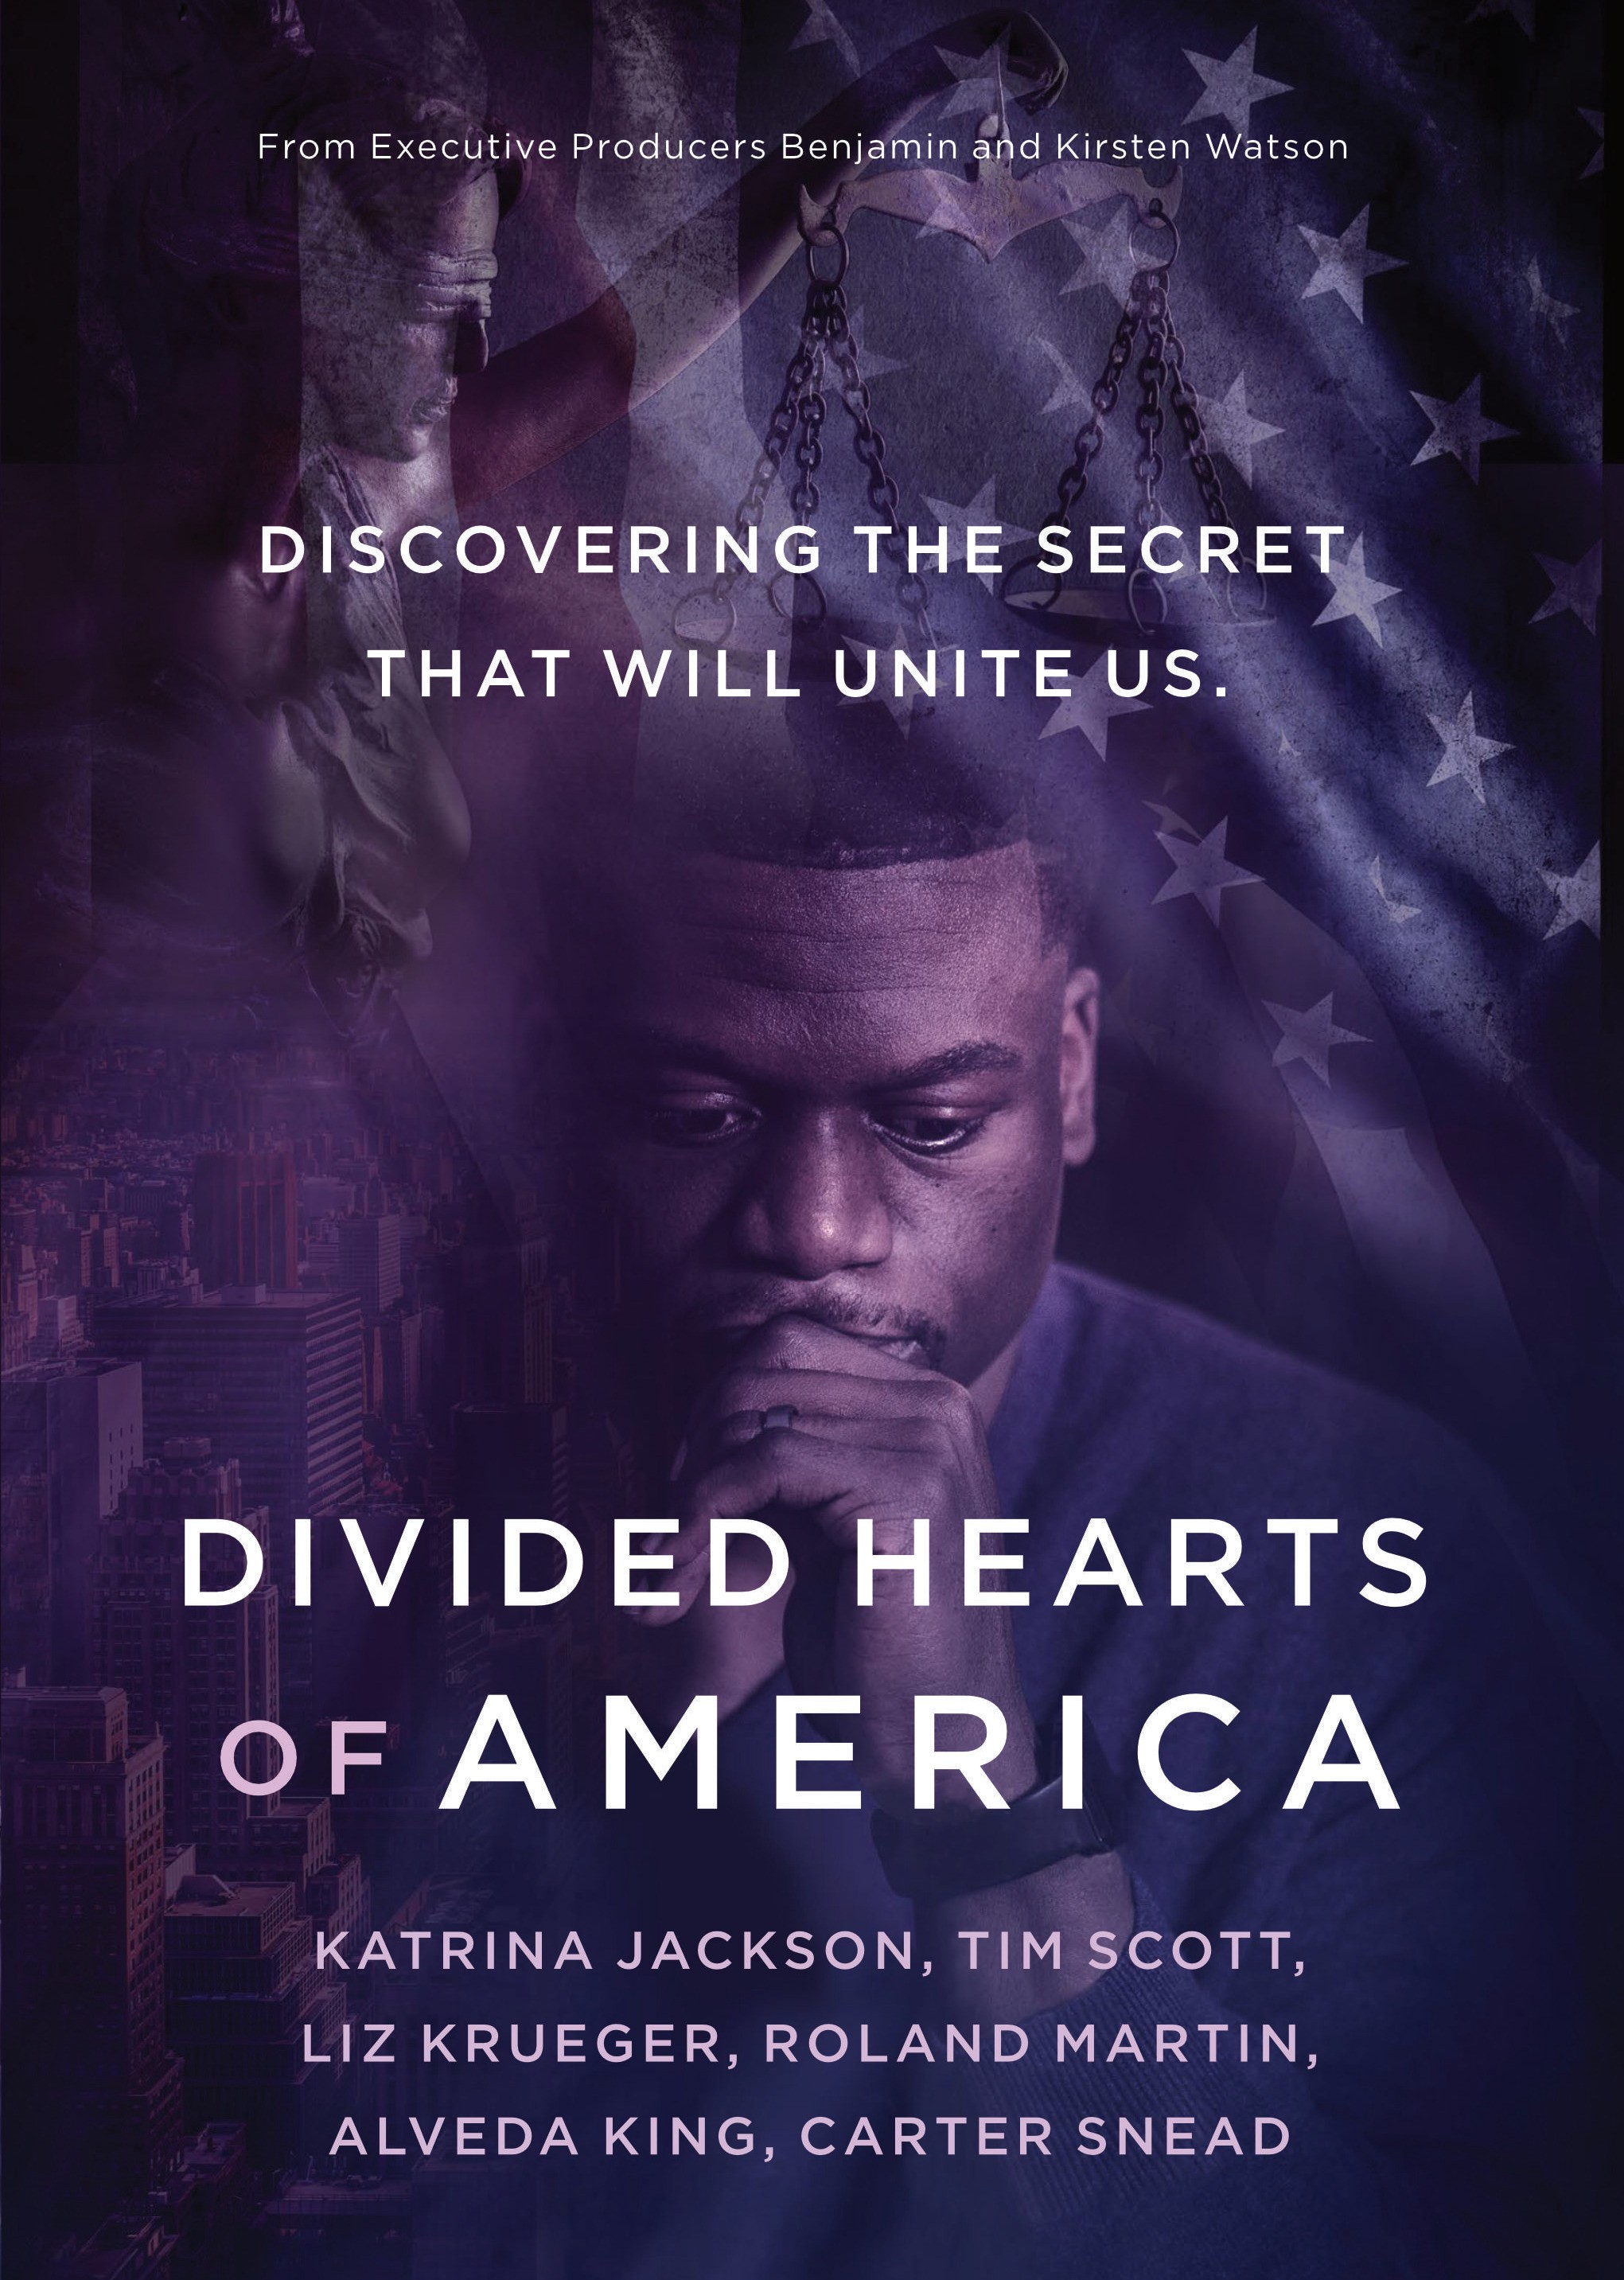 Divided Hearts of America DVD